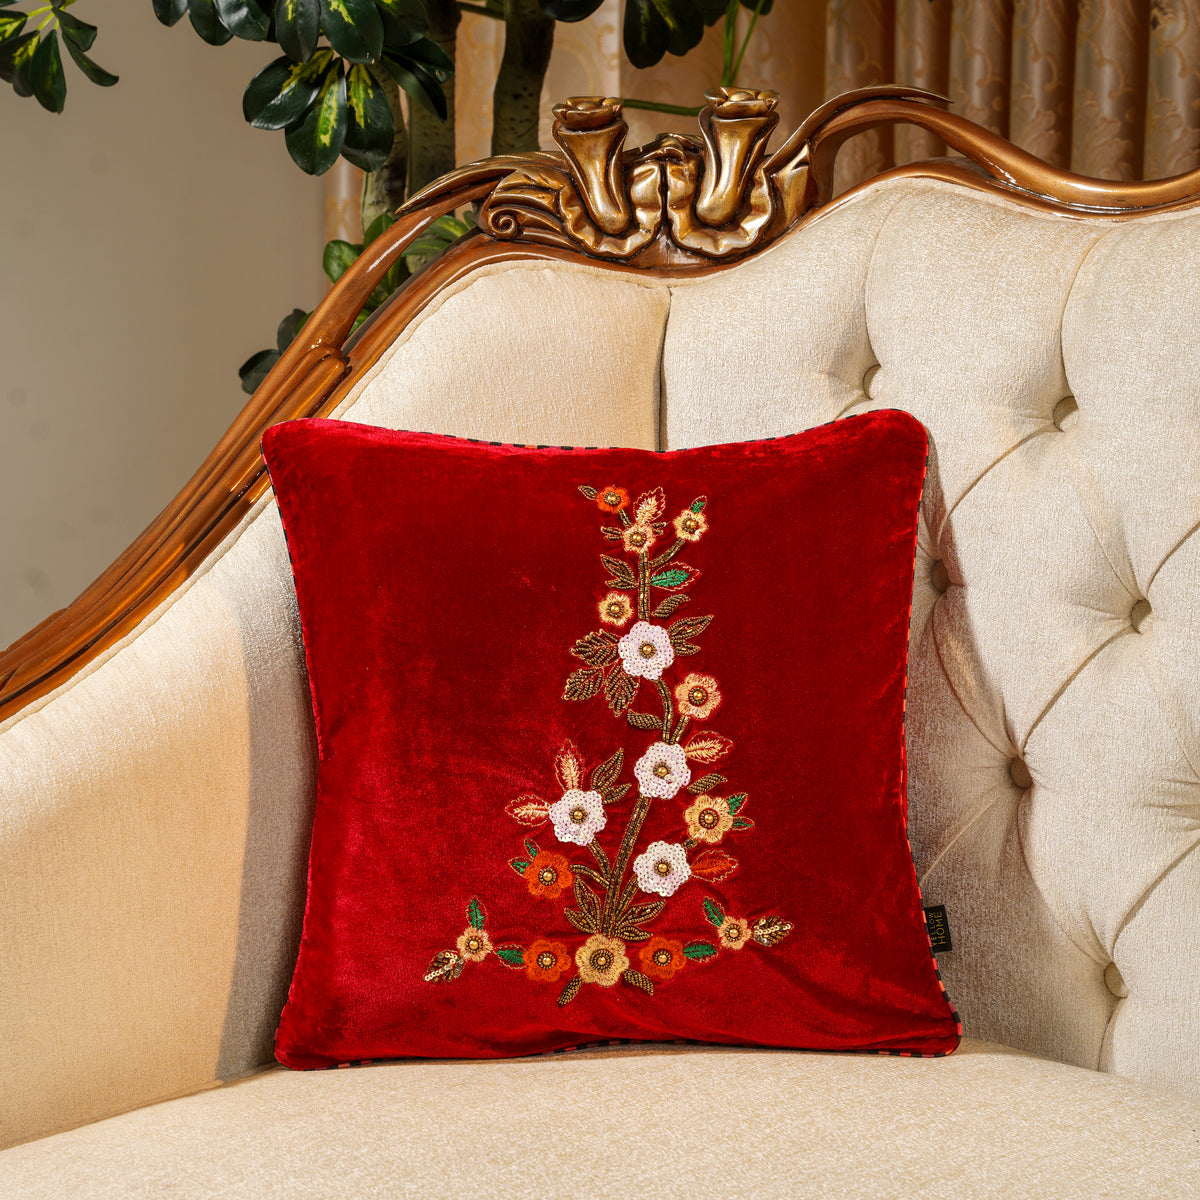 Cushion Cover - Maroon Red